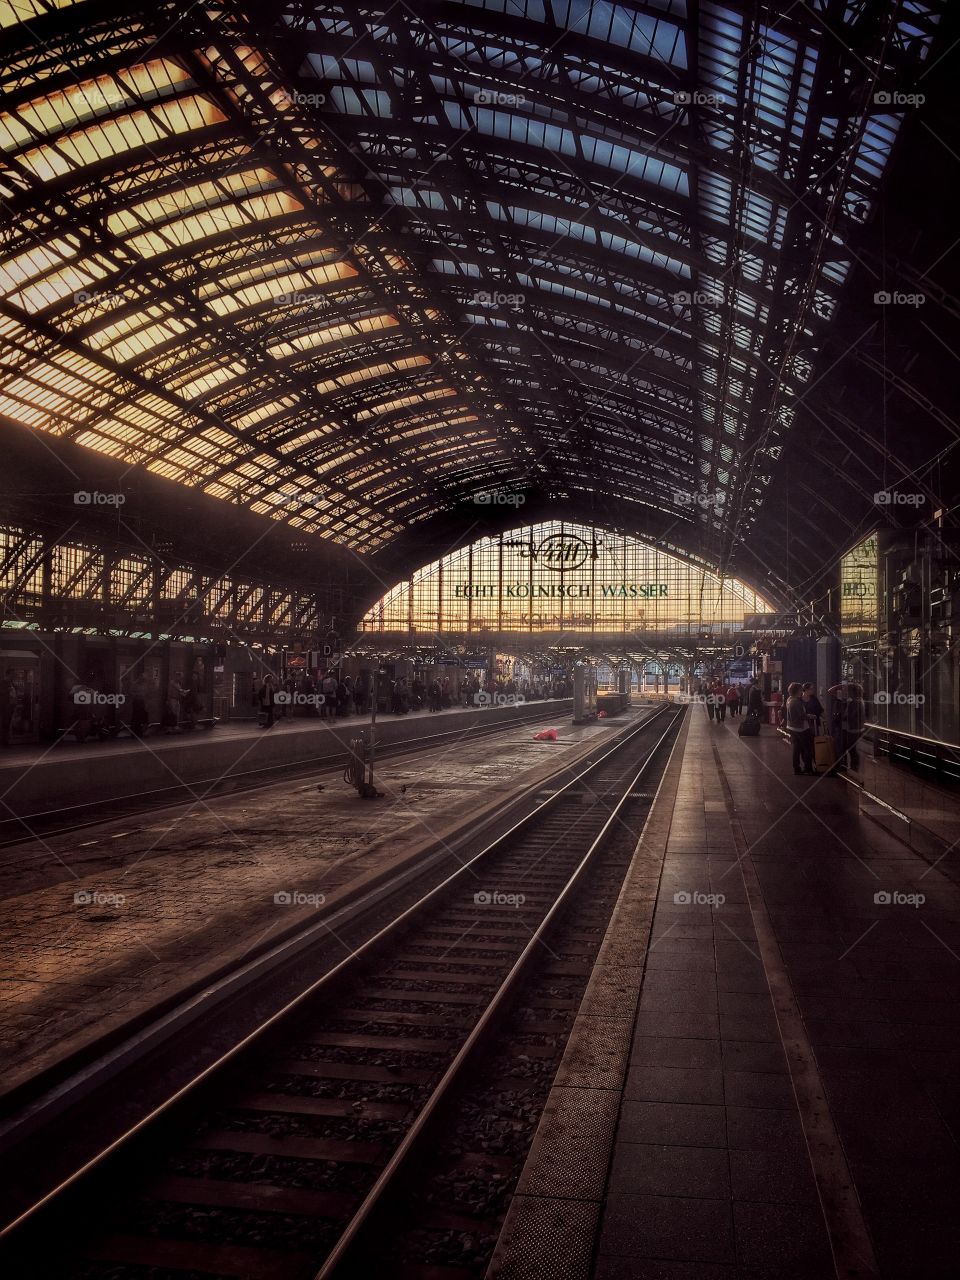 Central Station in Cologne. #railway #train #station